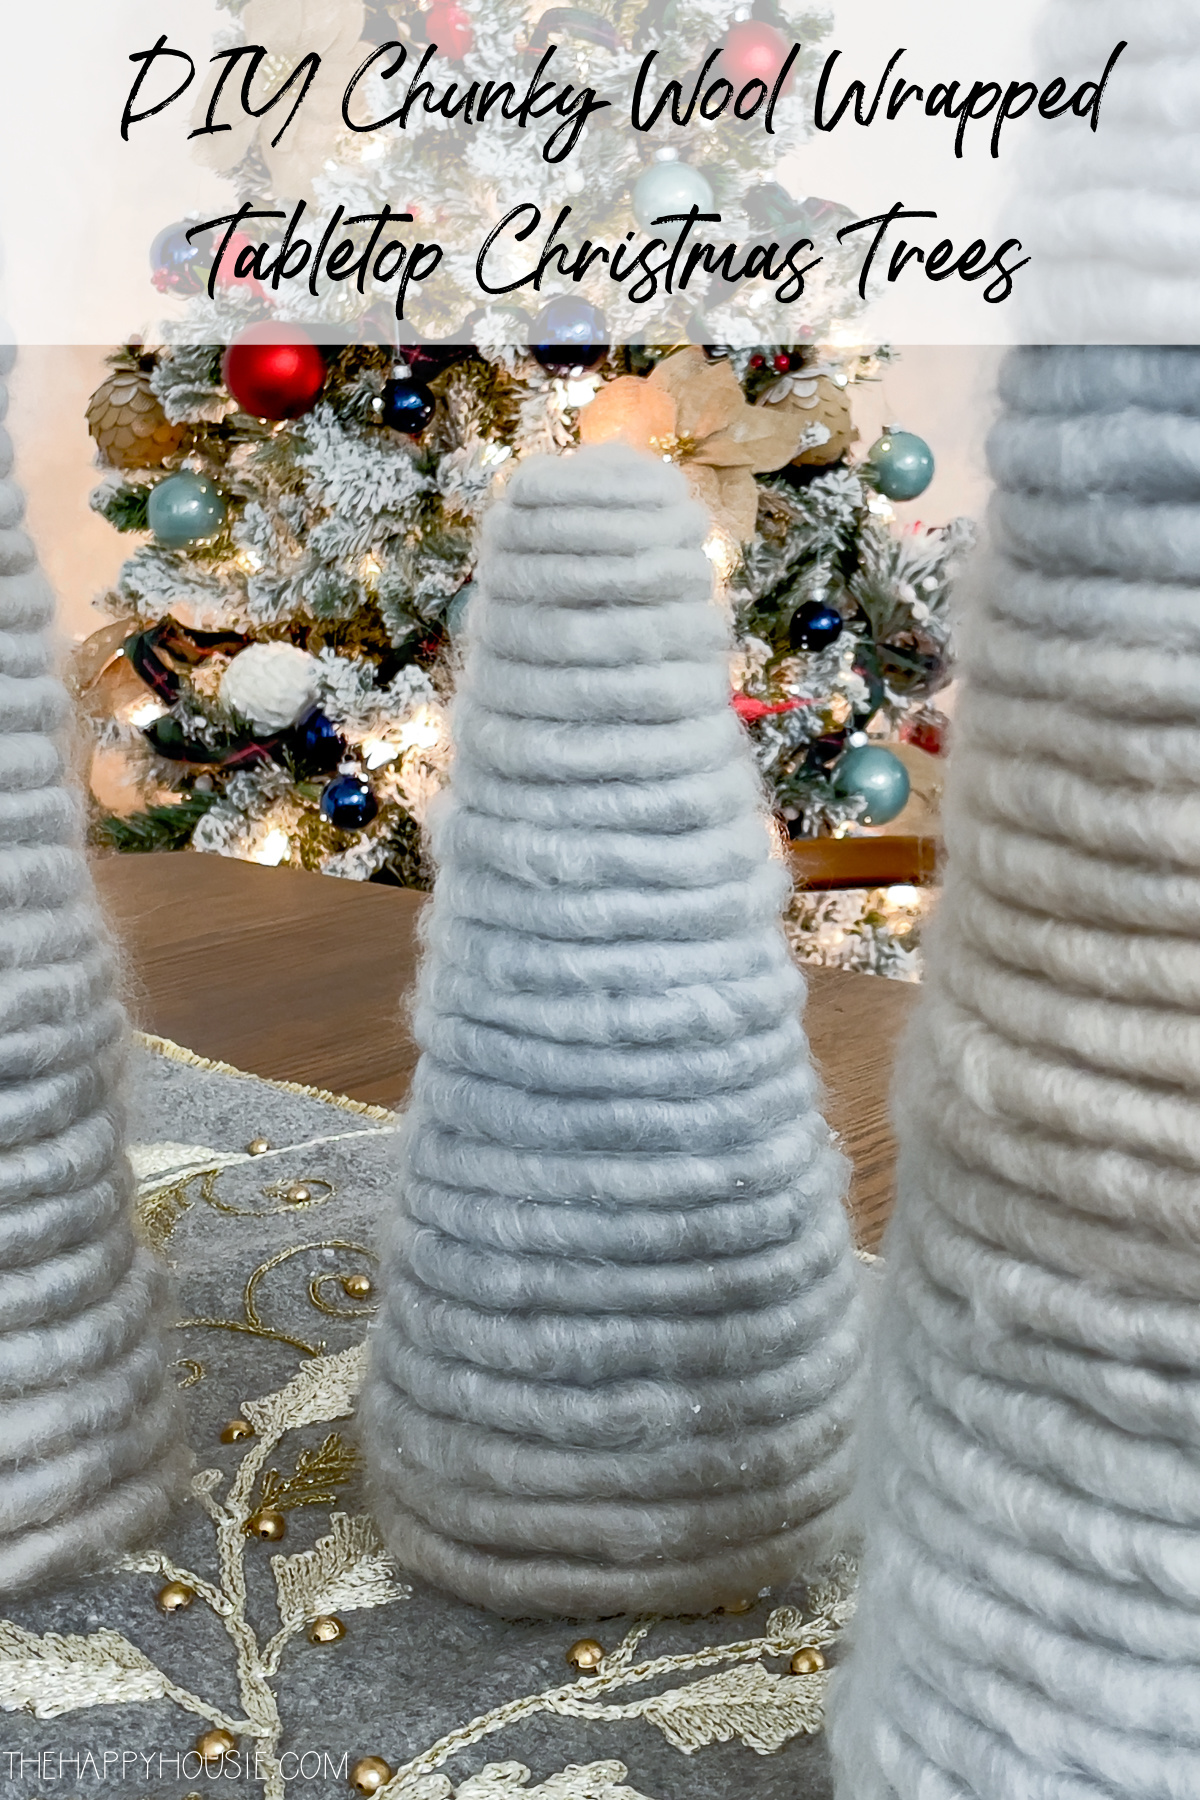 DIY Chunky Wool Wrapped Tabletop Christmas Trees graphic.